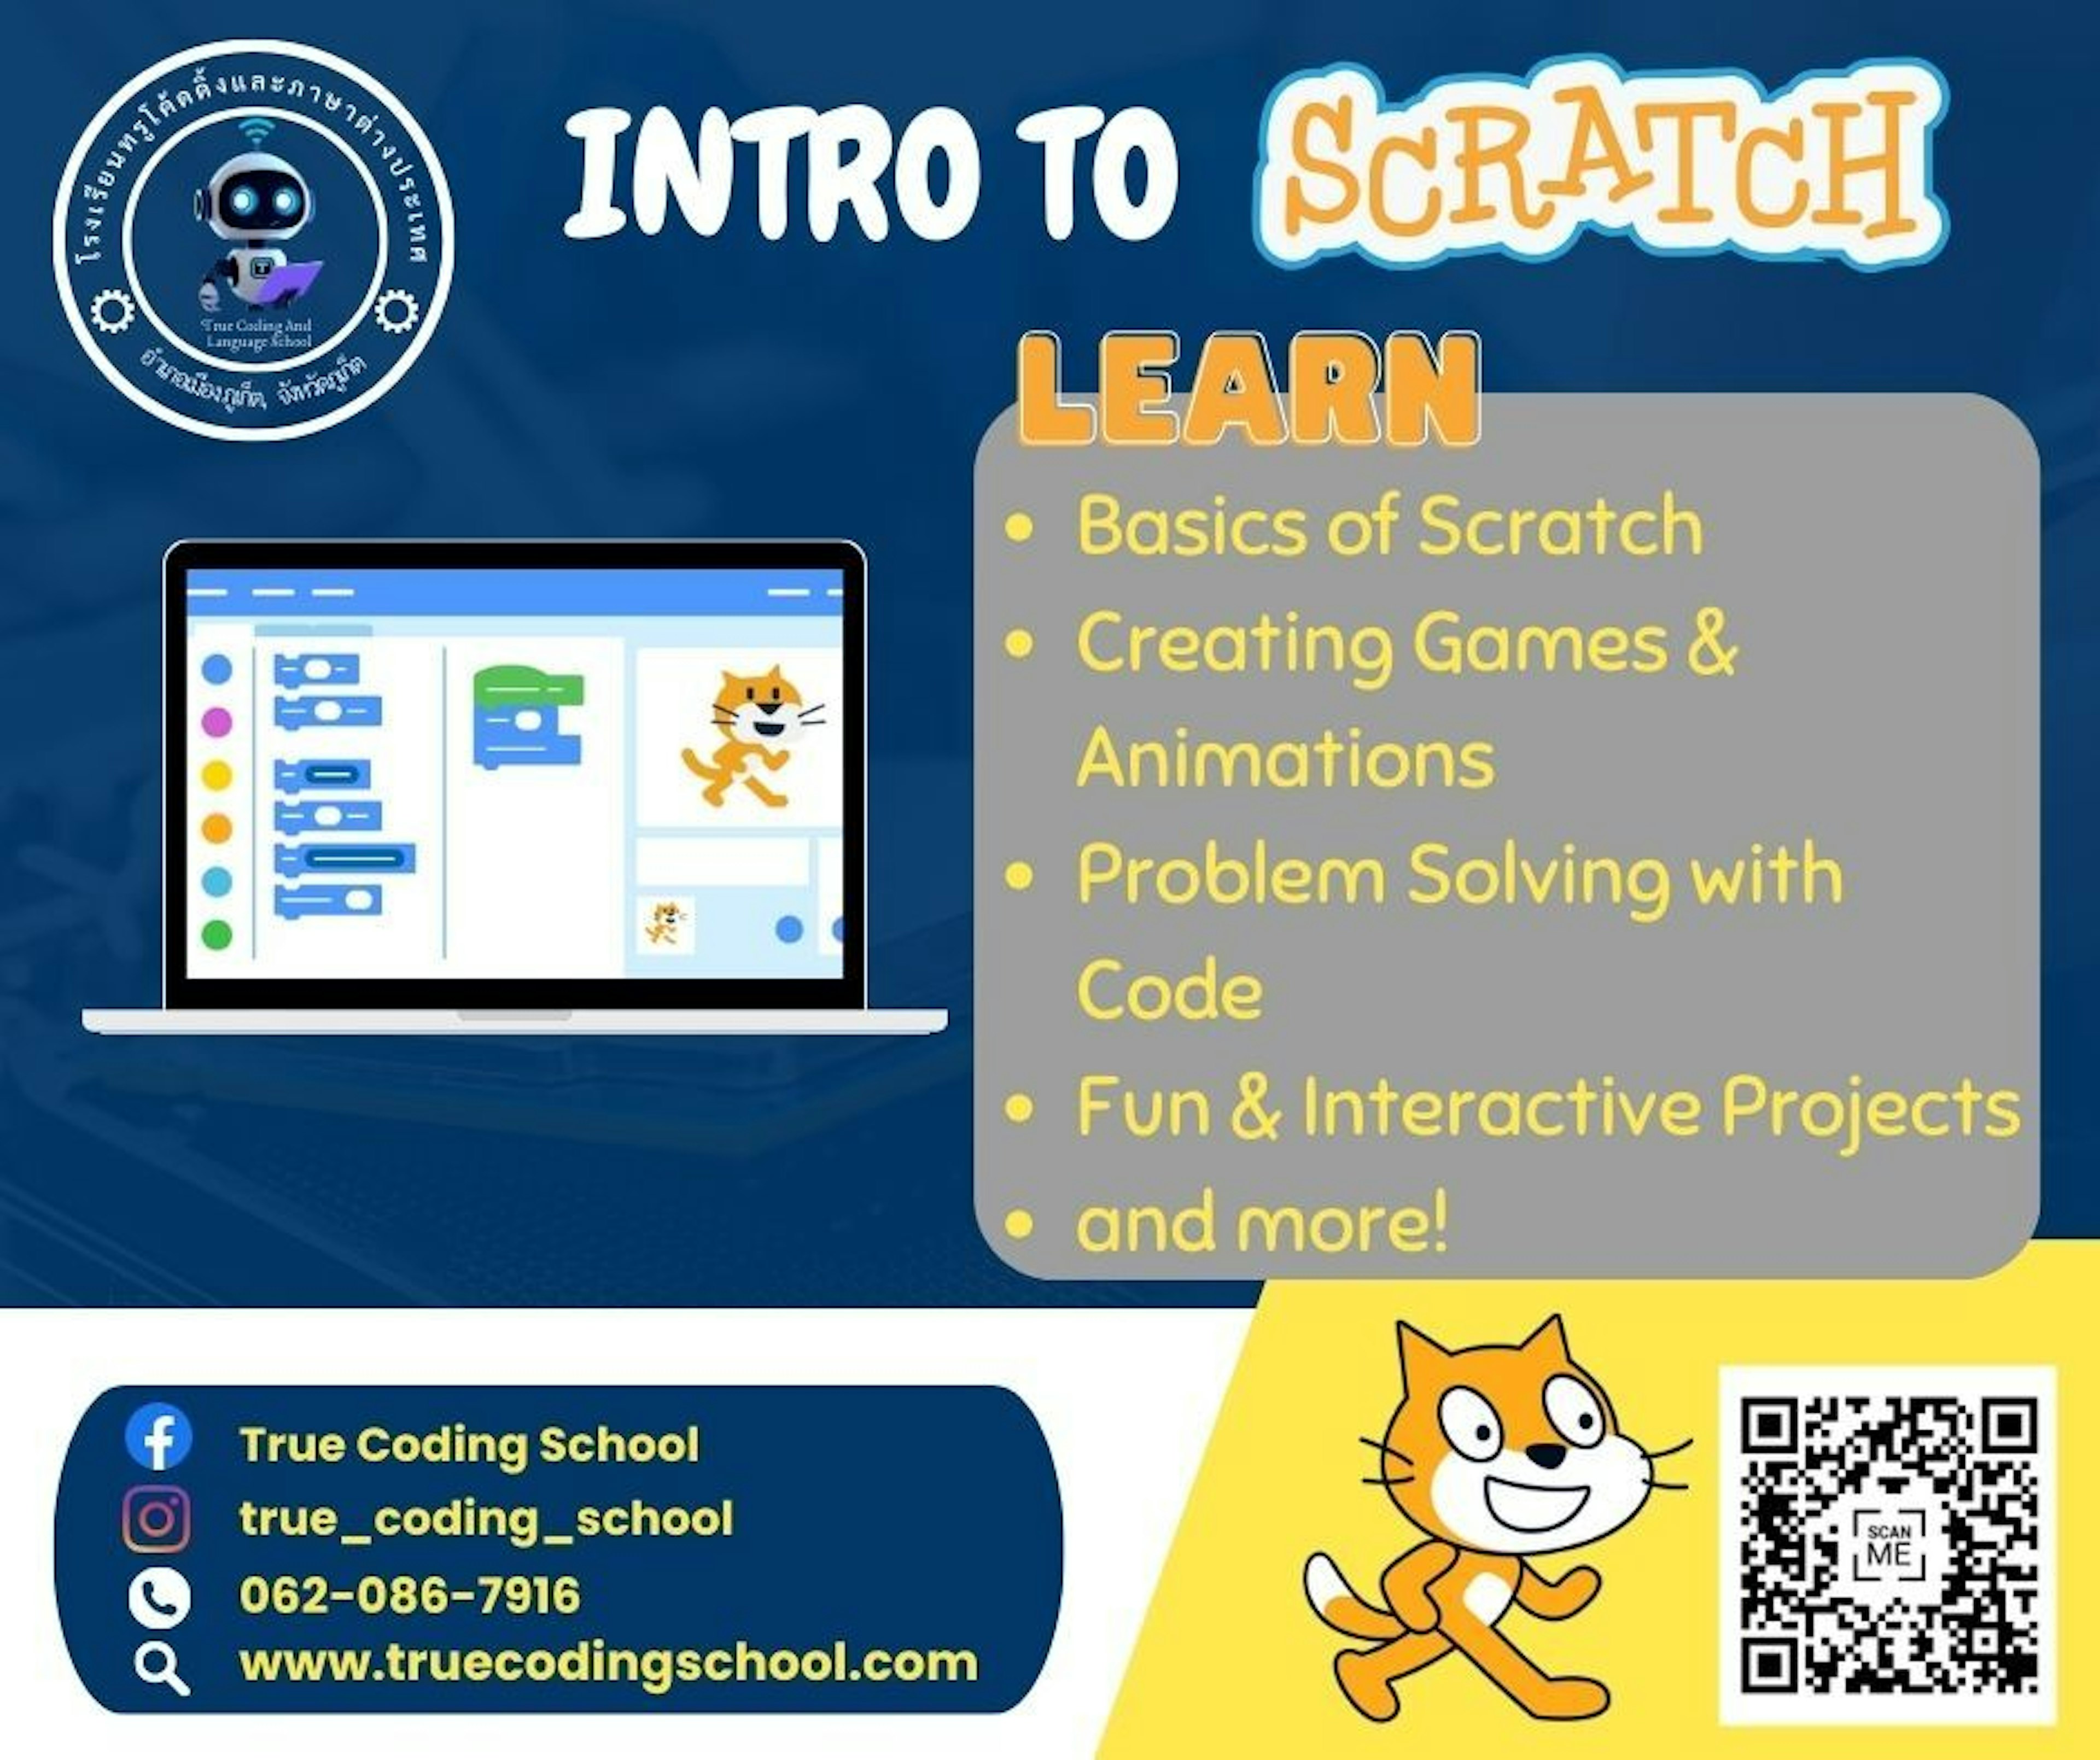 INTRODUCTION TO SCRATCH PROGRAMMING 